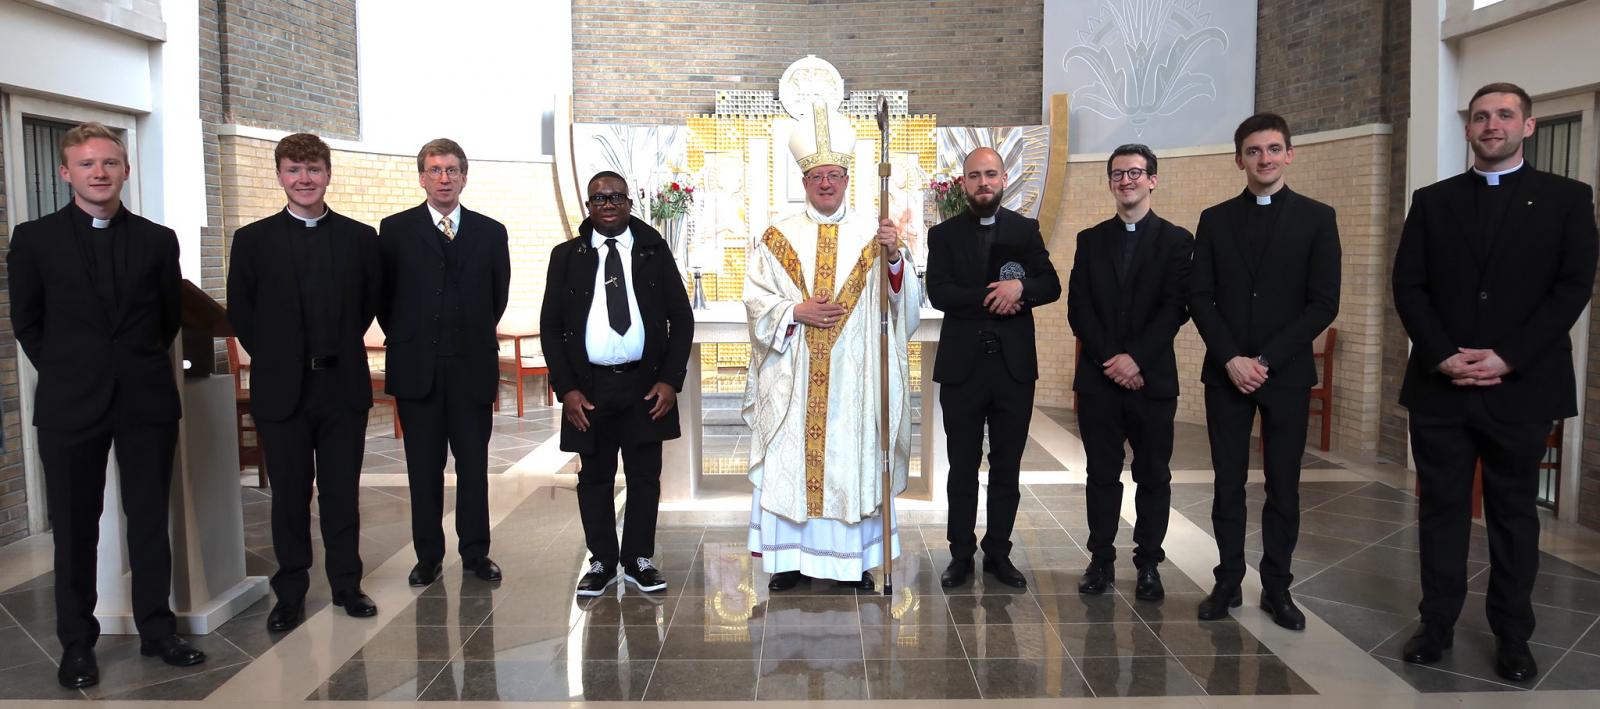 Seminarians instituted into ministry of lector and admitted to candidacy - Diocese of Westminster